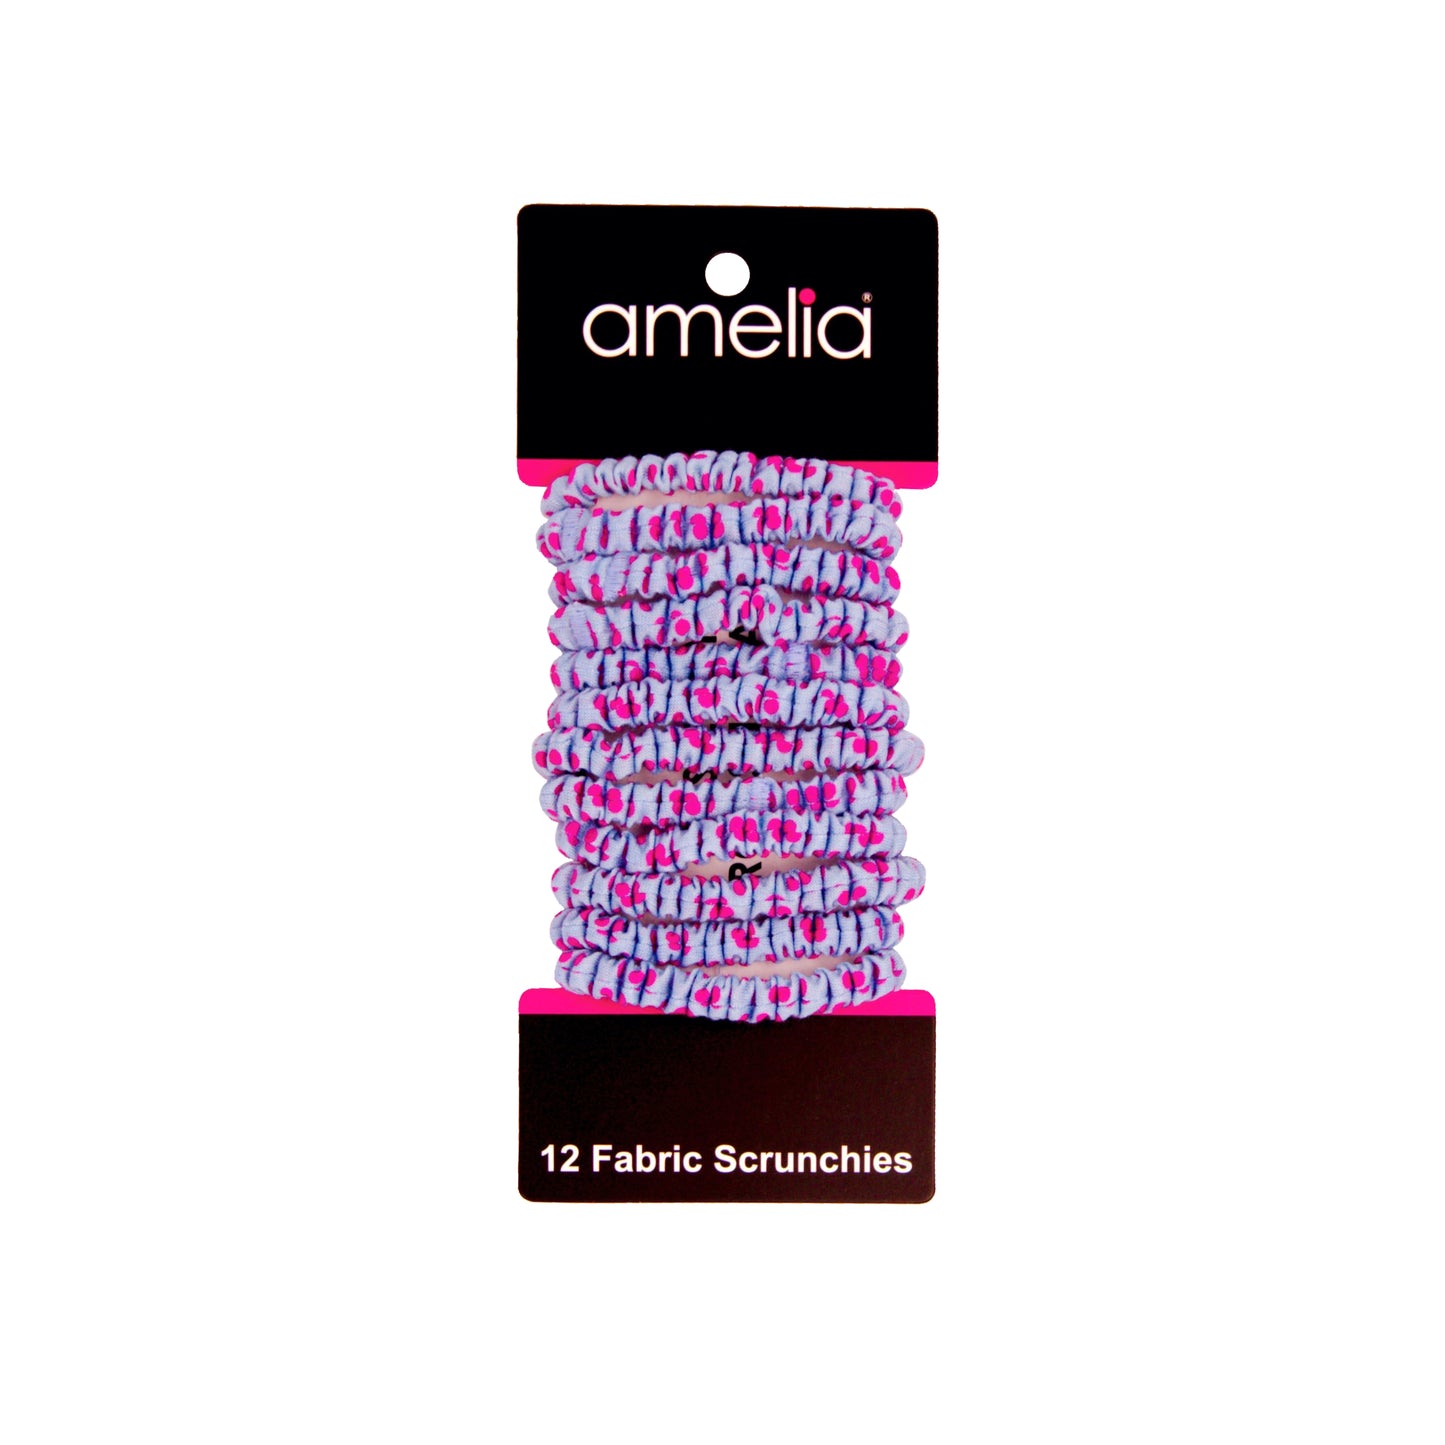 Amelia Beauty, Pink with Blue Dots Skinny Jersey Scrunchies, 2.125in Diameter, Gentle on Hair, Strong Hold, No Snag, No Dents or Creases. 12 Pack